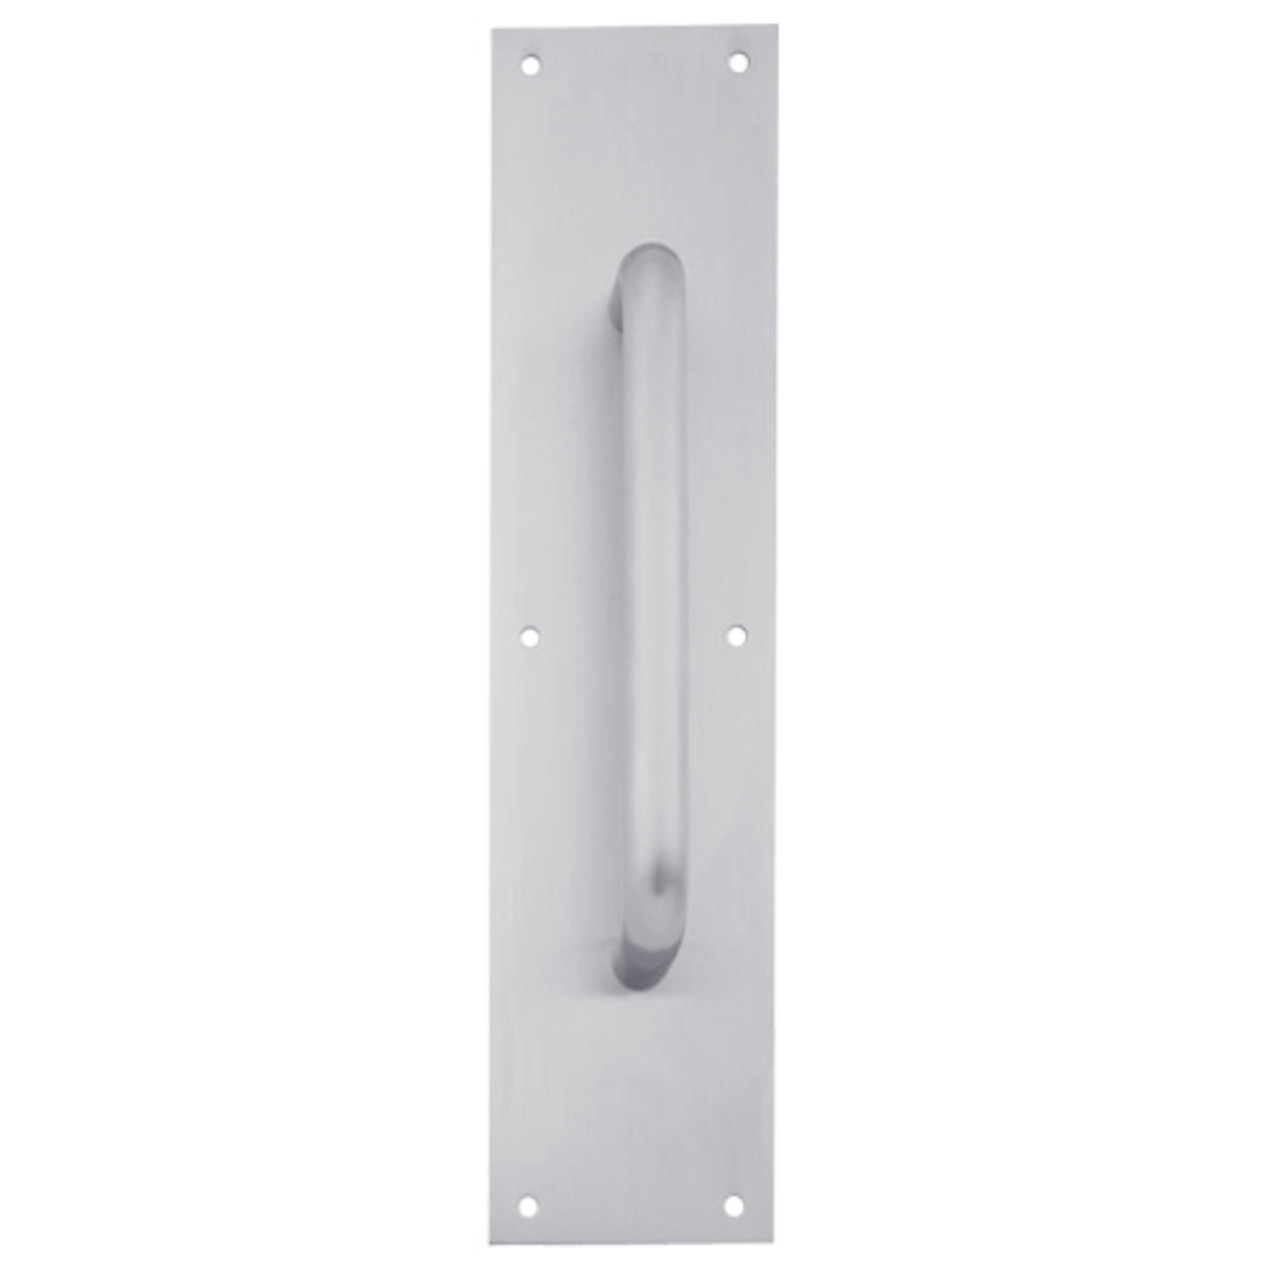 8302-8-US26D-6x16 IVES Architectural Door Trim 6x16 Inch Pull Plate in Satin Chrome